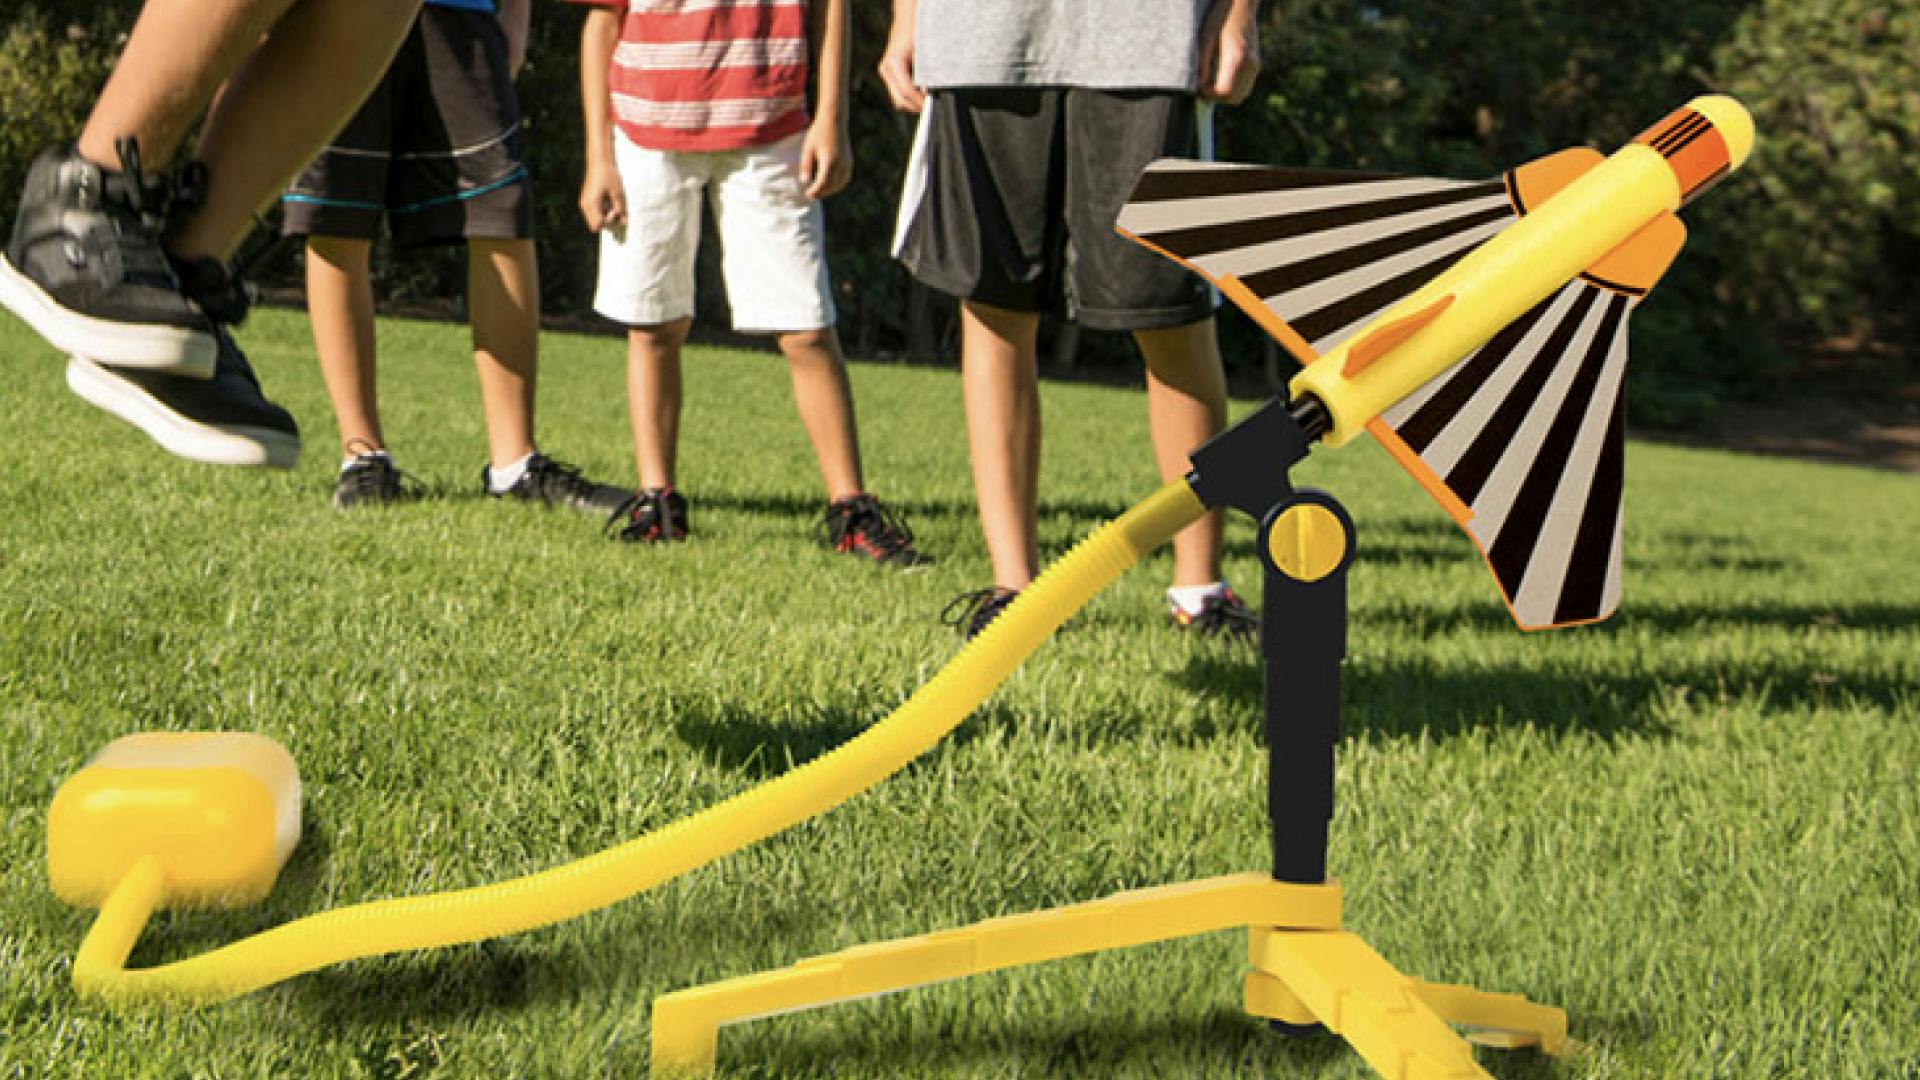 stomp rocket game for kids to pay